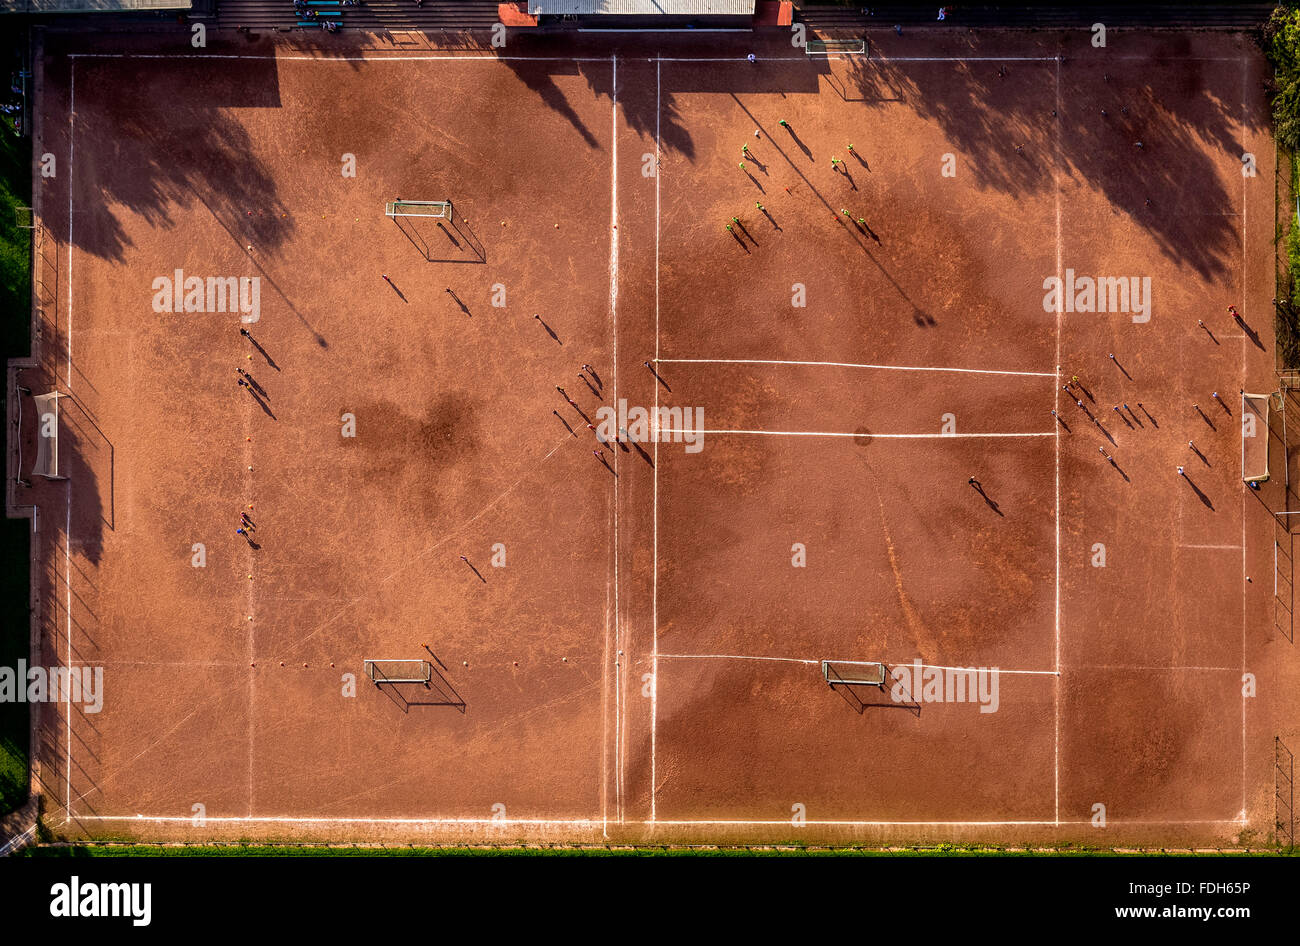 Aerial view, sports facility VfL Börnig in Herne Börnig in youth training, Perpendicular Recording, soccer field, clay court, Stock Photo